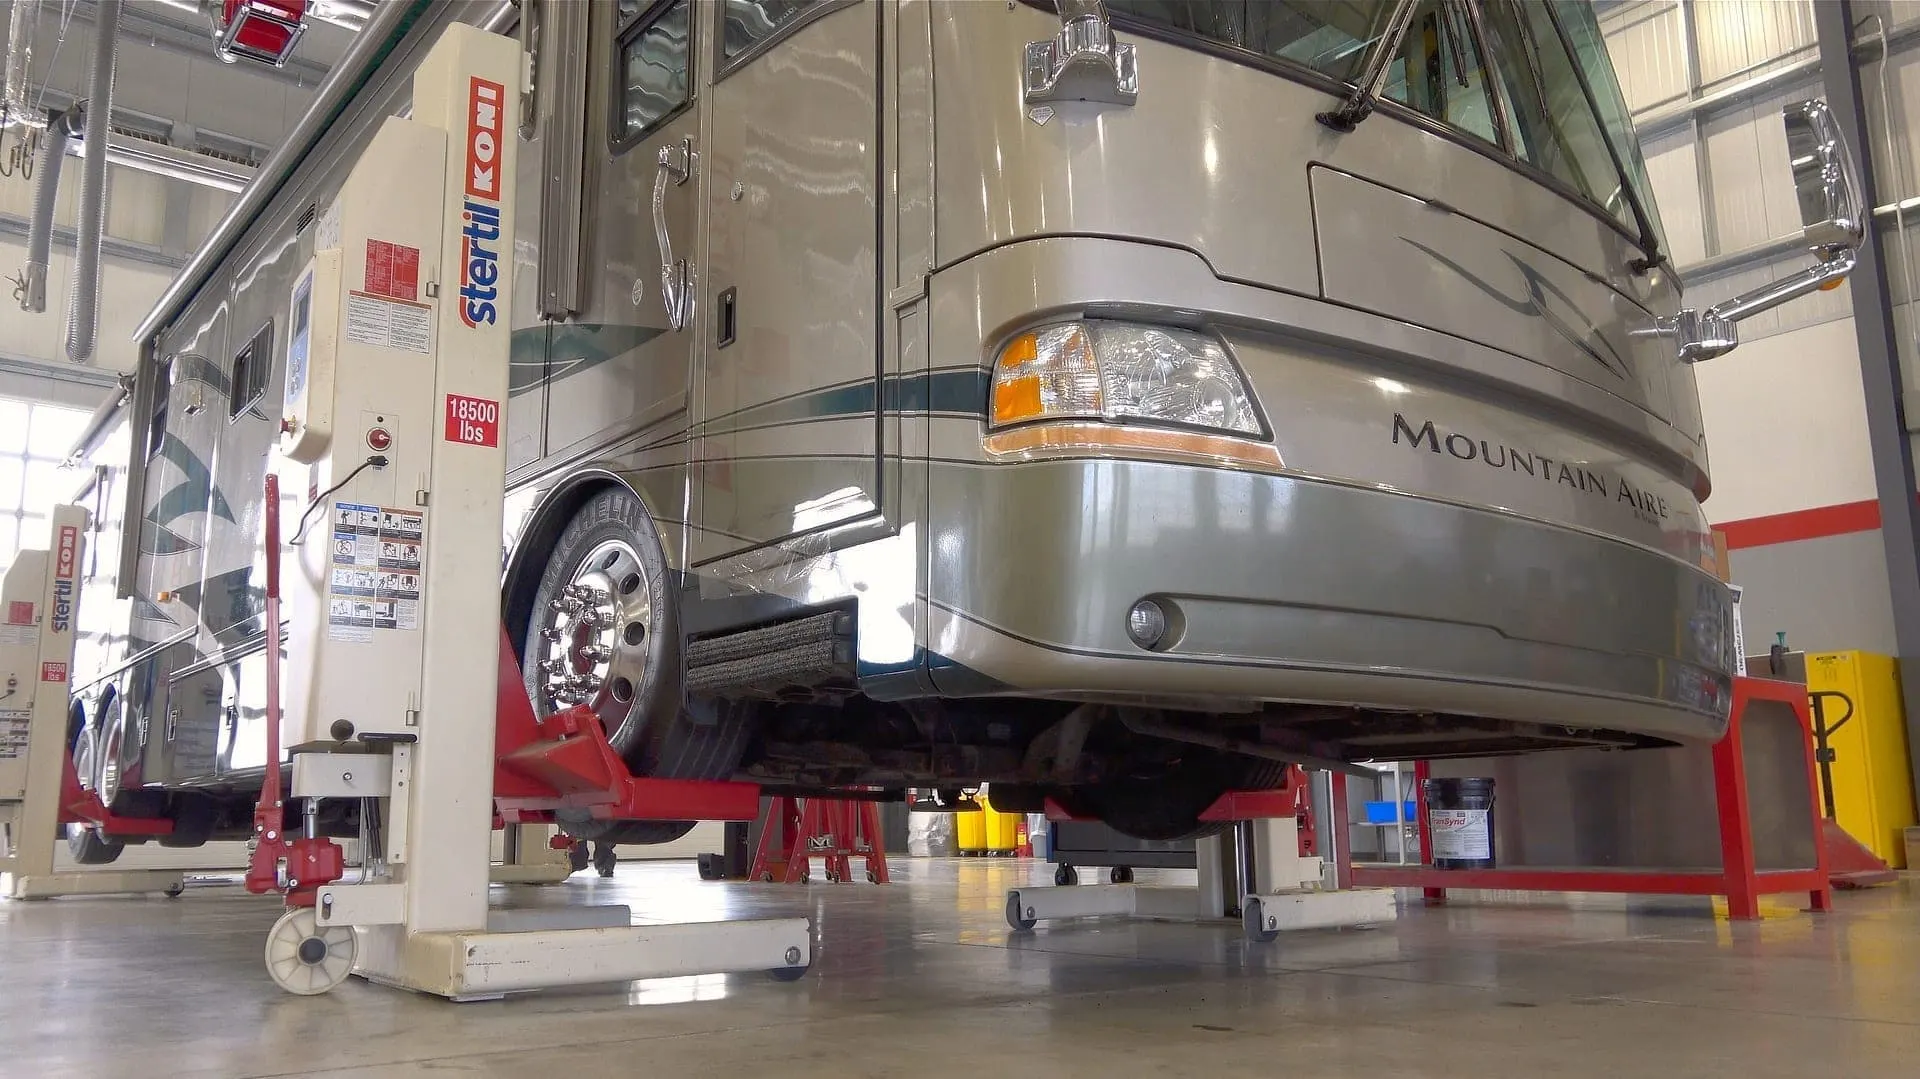 A motorhome on lifts while at an RV mechanic